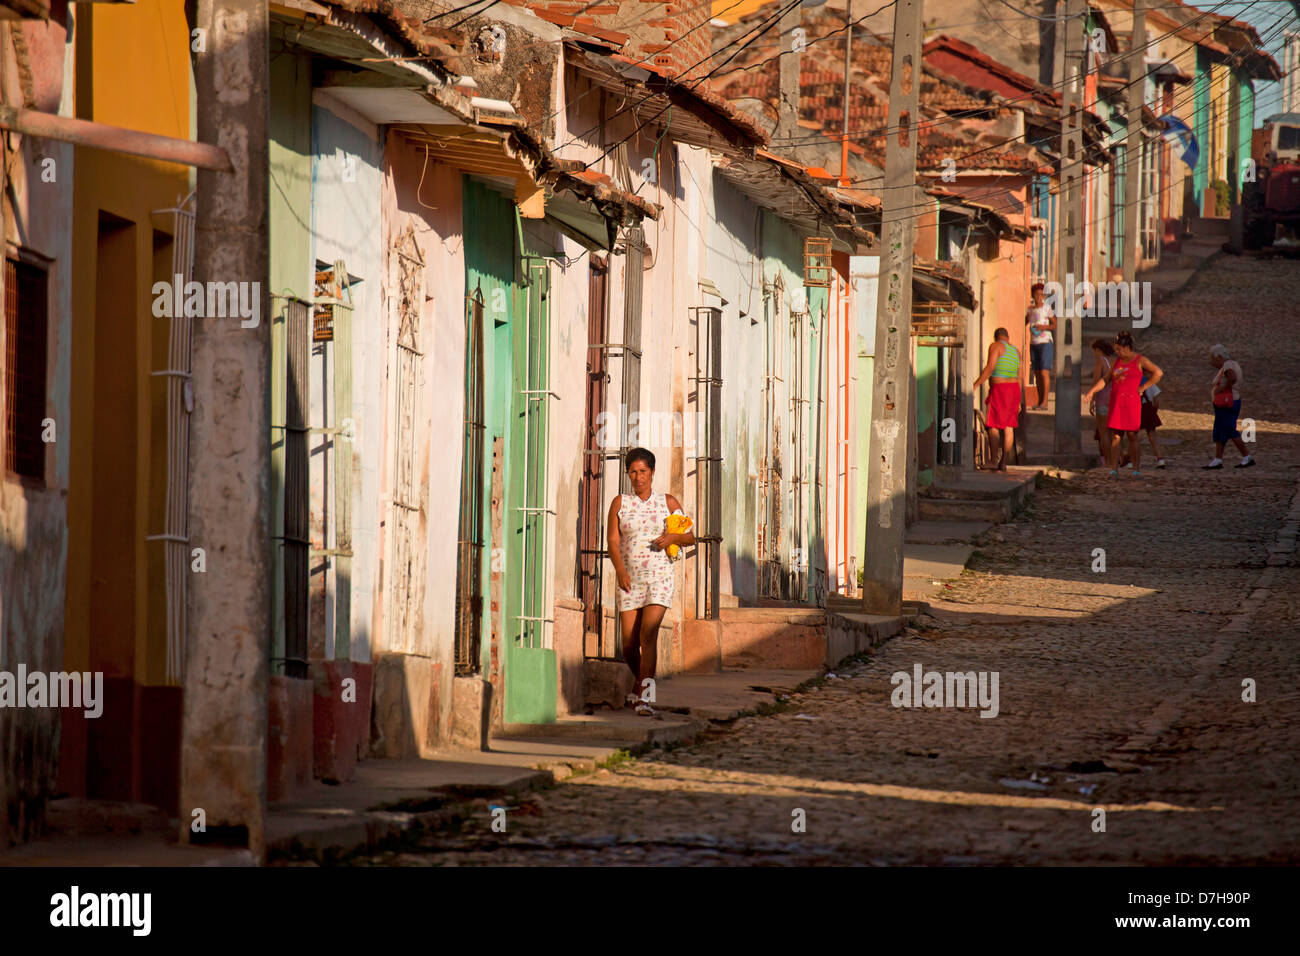 typical cobblestone street with colourful homes in the old town of Trinidad, Cuba, Caribbean Stock Photo